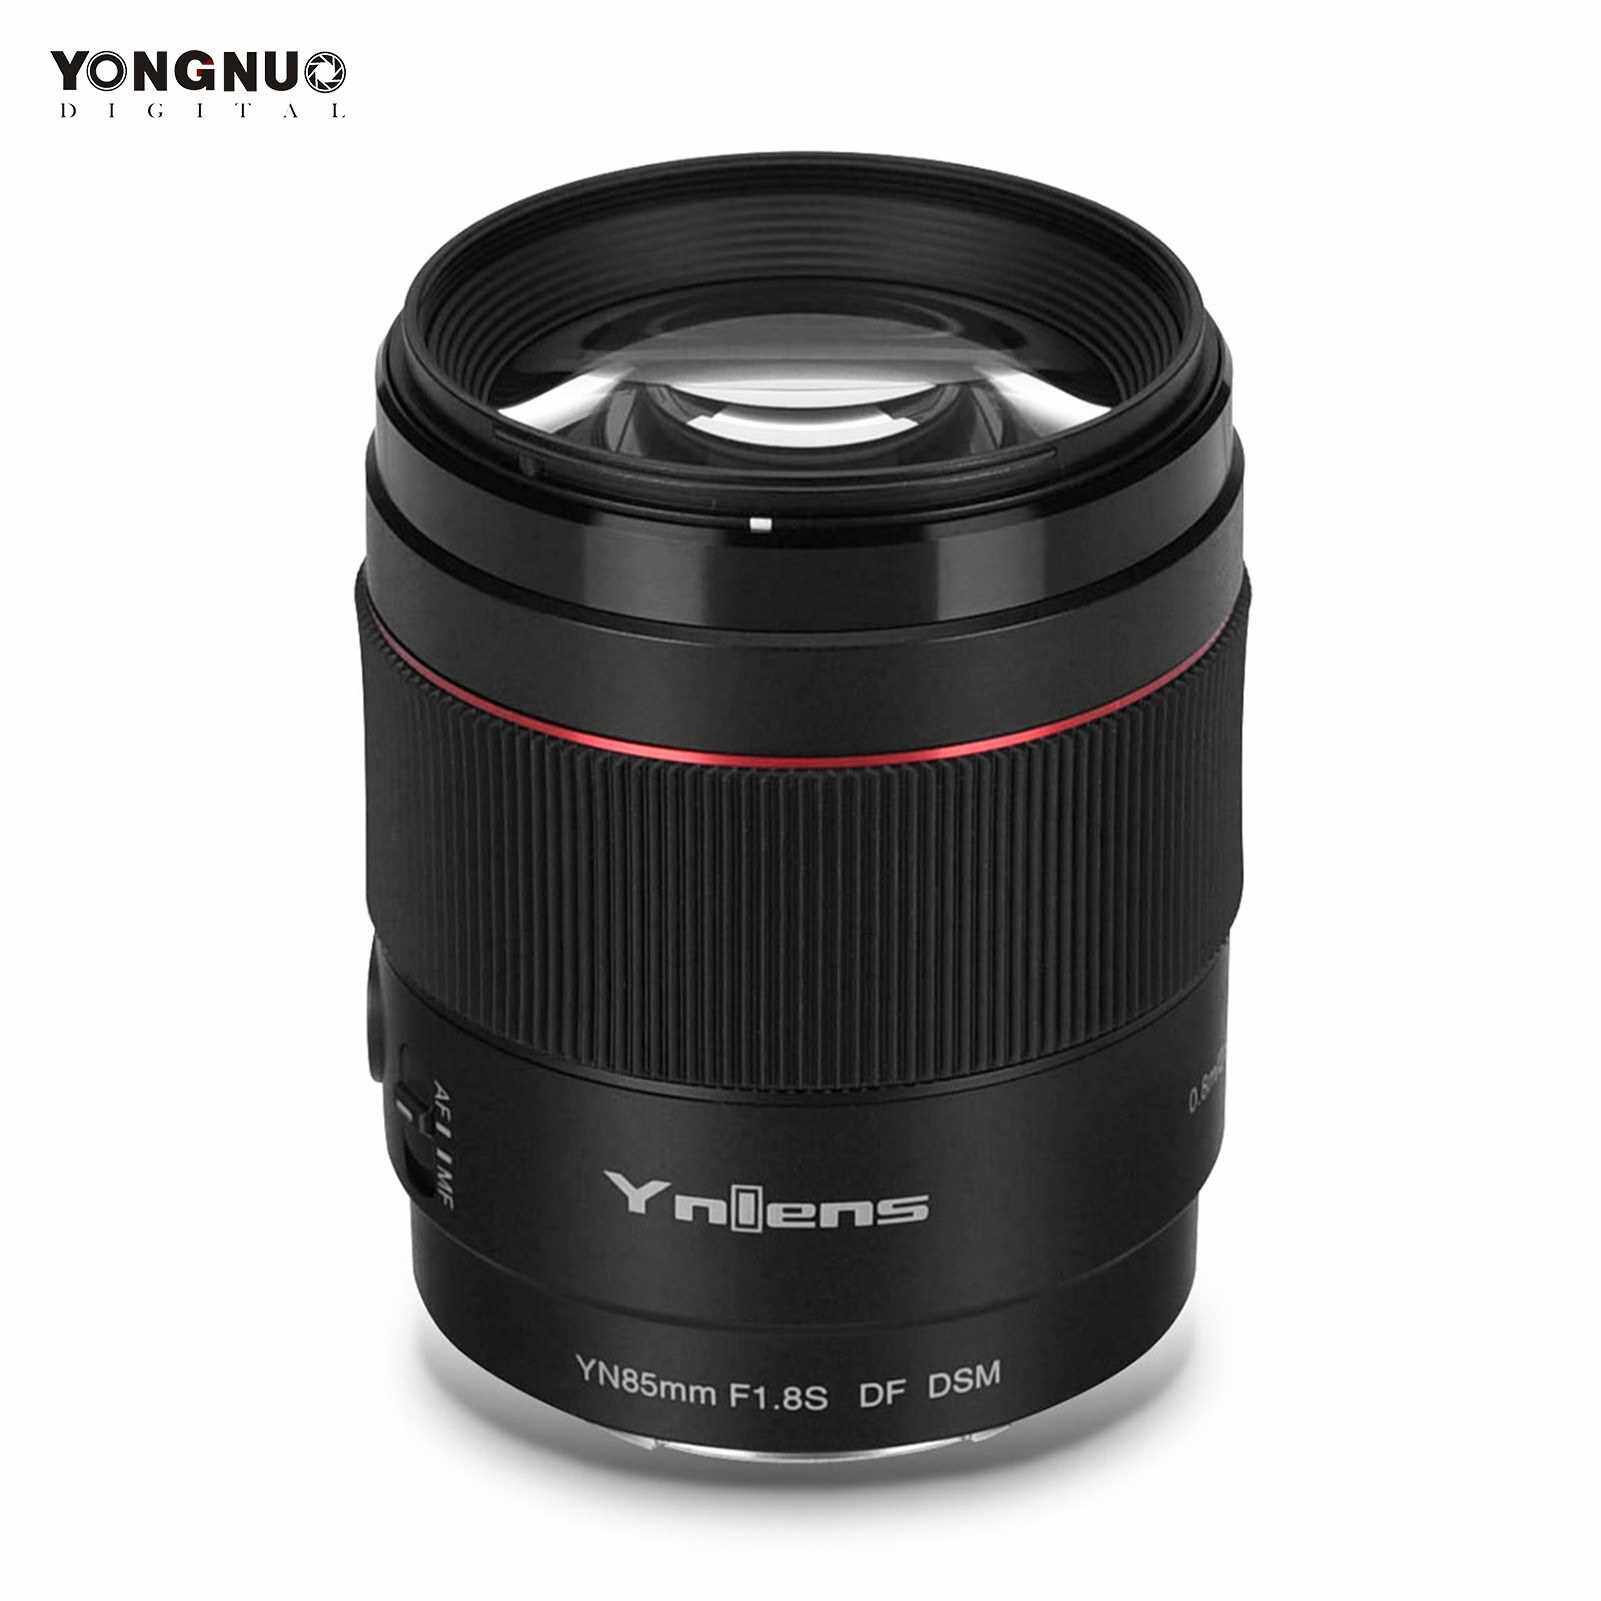 YNLENS YN85mm F1.8S DF 85MM Auto Focus Camera Lens F1.8 Large Aperture 8 Groups 9 Blades High-quality Focus Motor Smart Face Focus Replacement for Sony E-Mount Cameras (Standard)